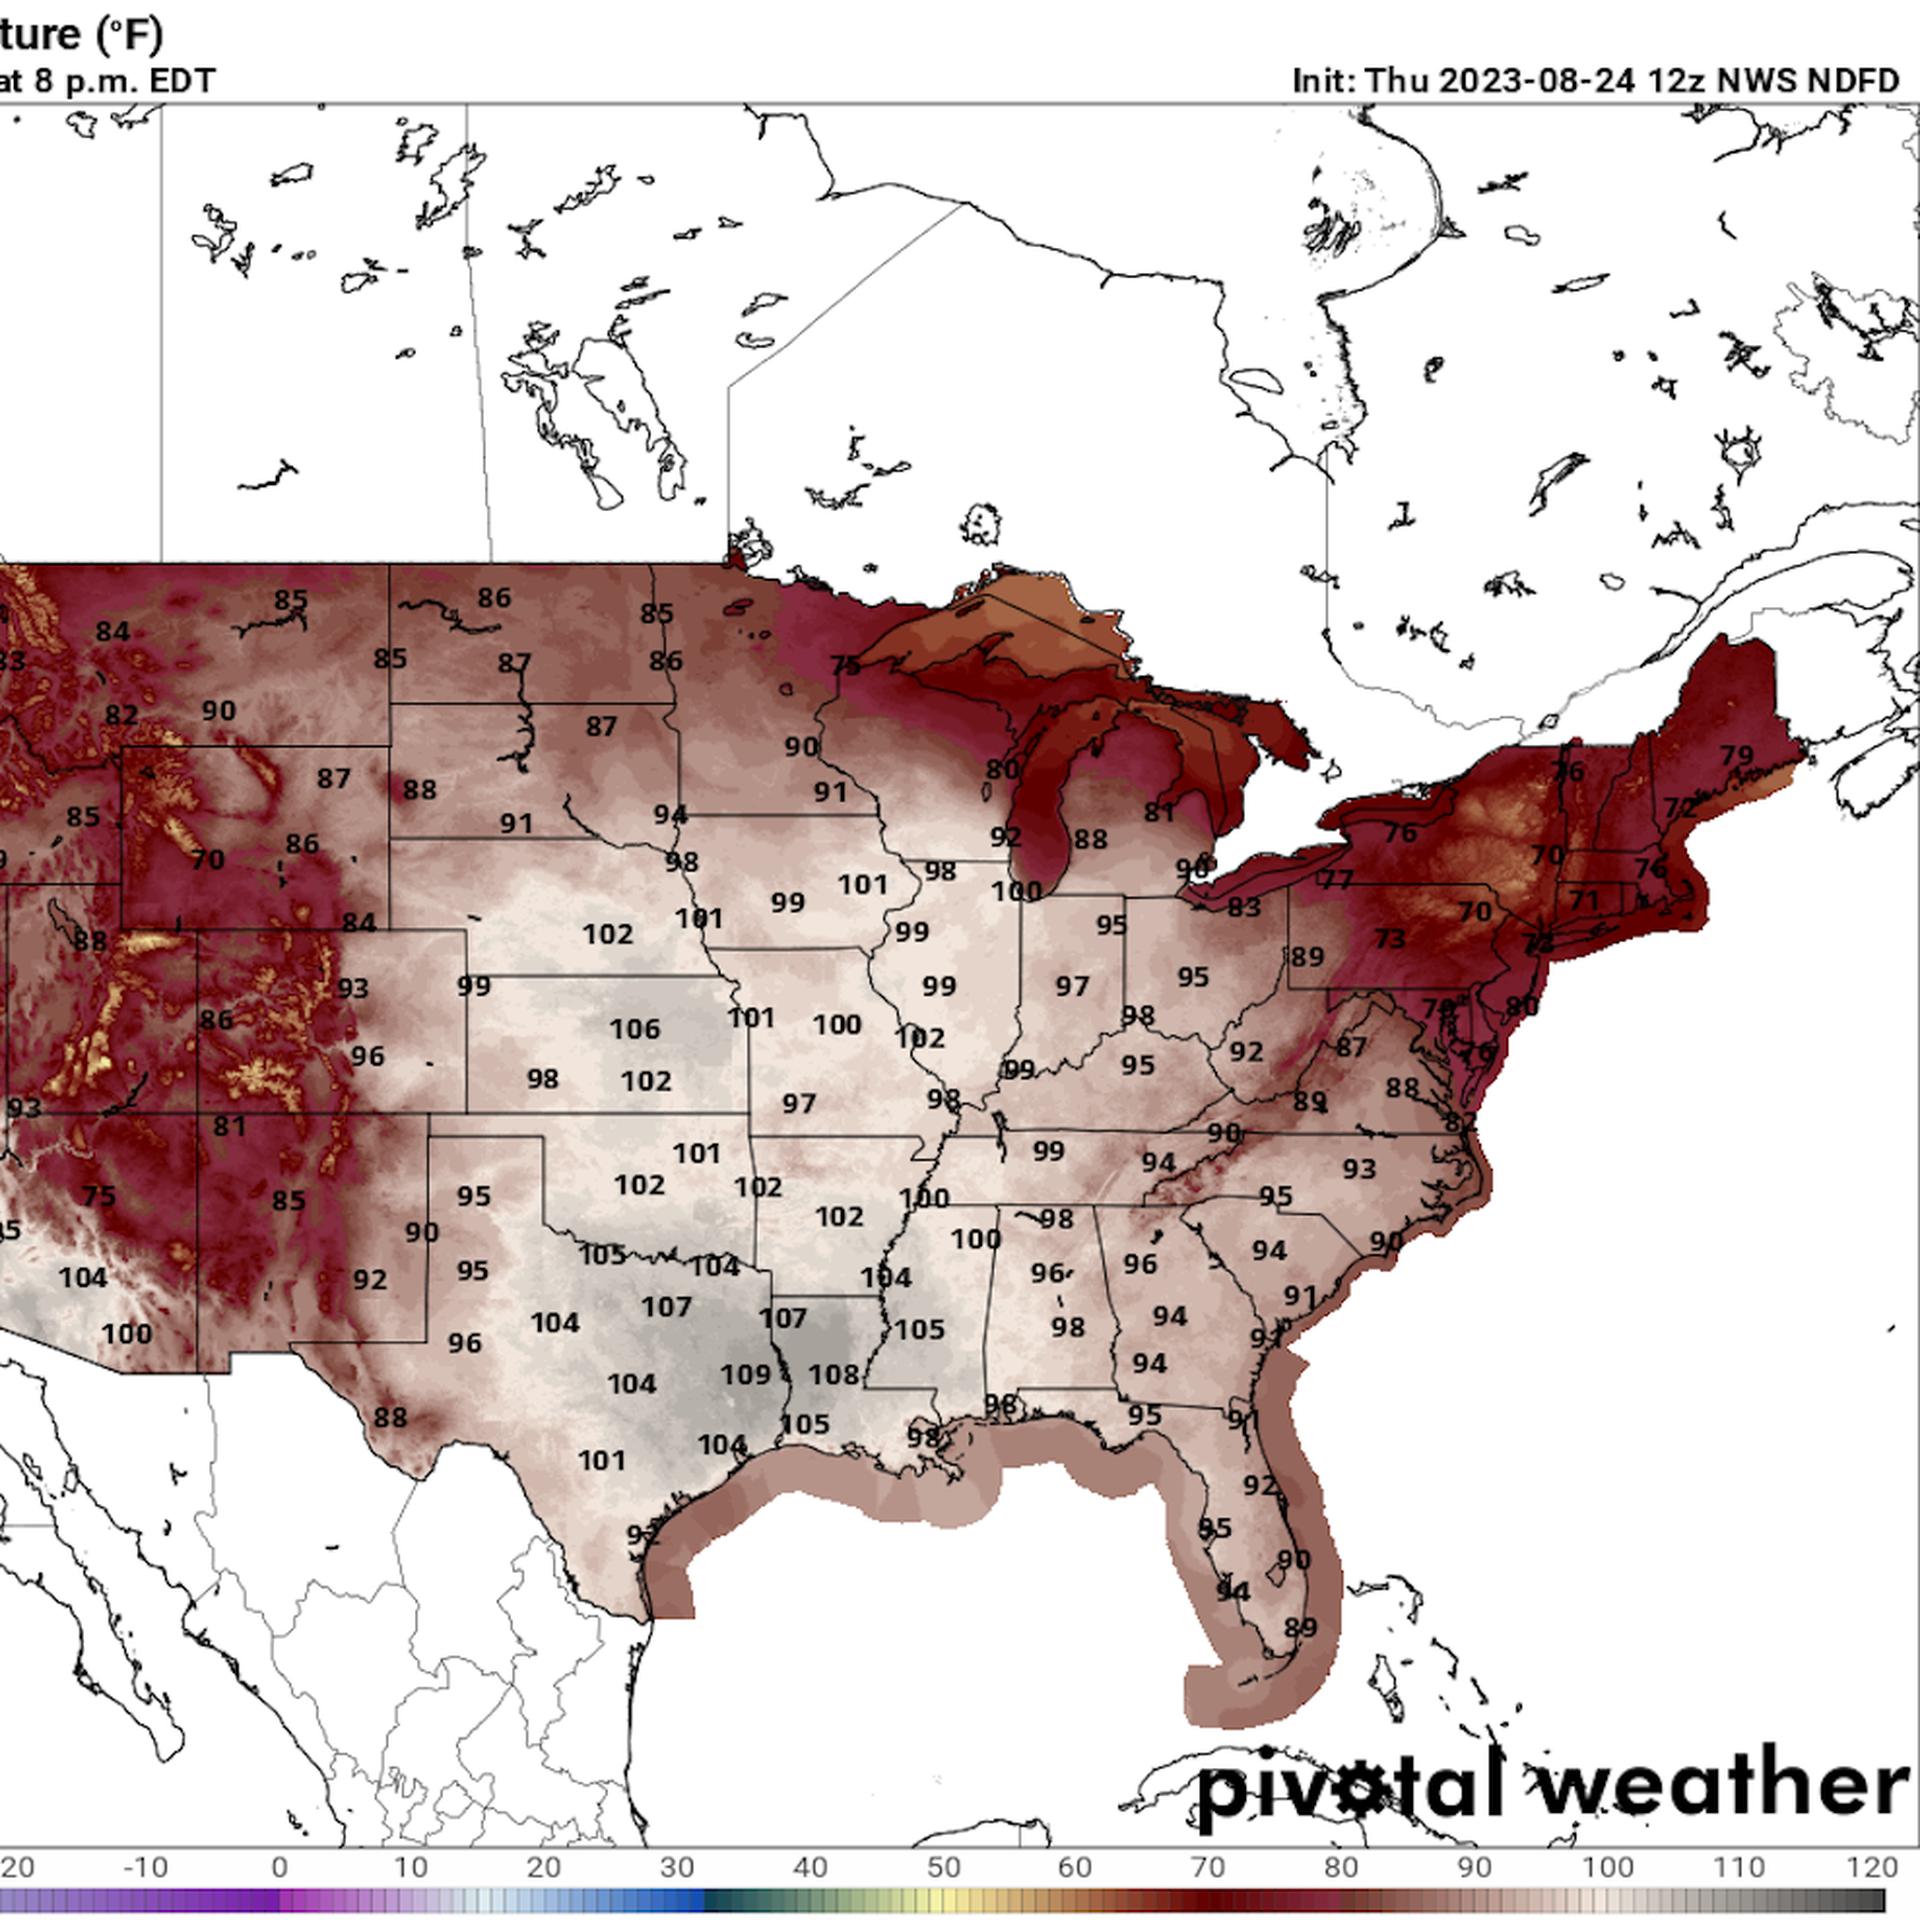 Intense heat dome shatters all-time records in U.S. as Europe roasts